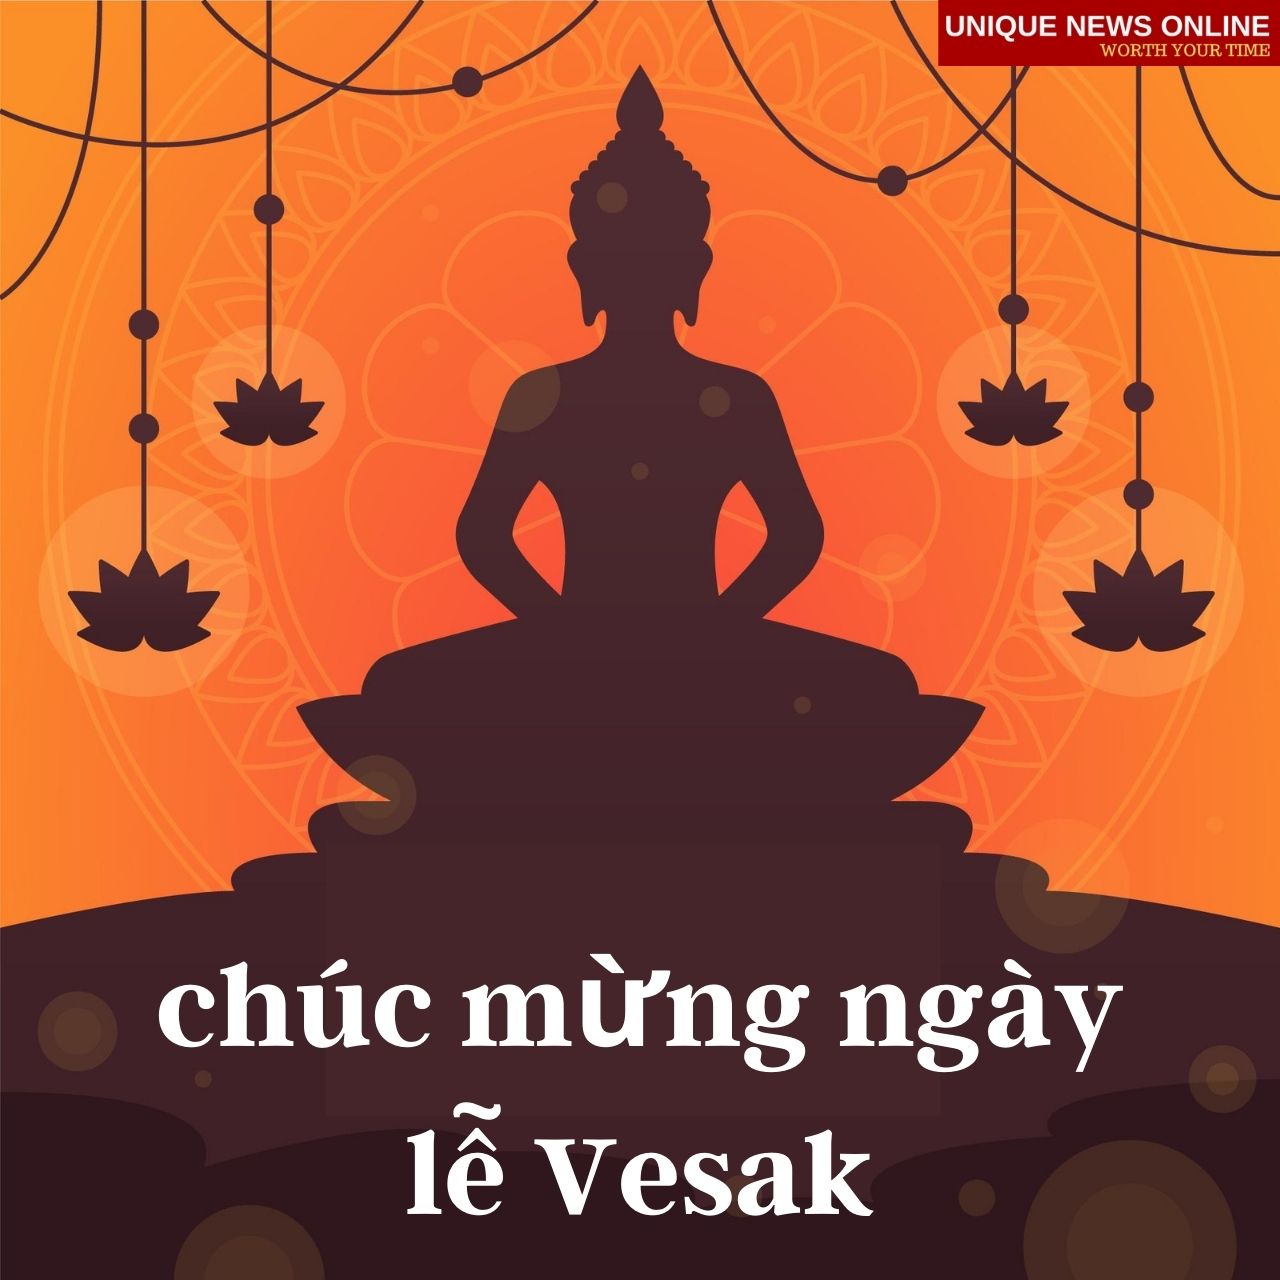 Vesak Day 2021: Malay and Vietnamese Wishes, HD Images, Greetings, Quotes, Status, and WhatsApp Messages to Share on